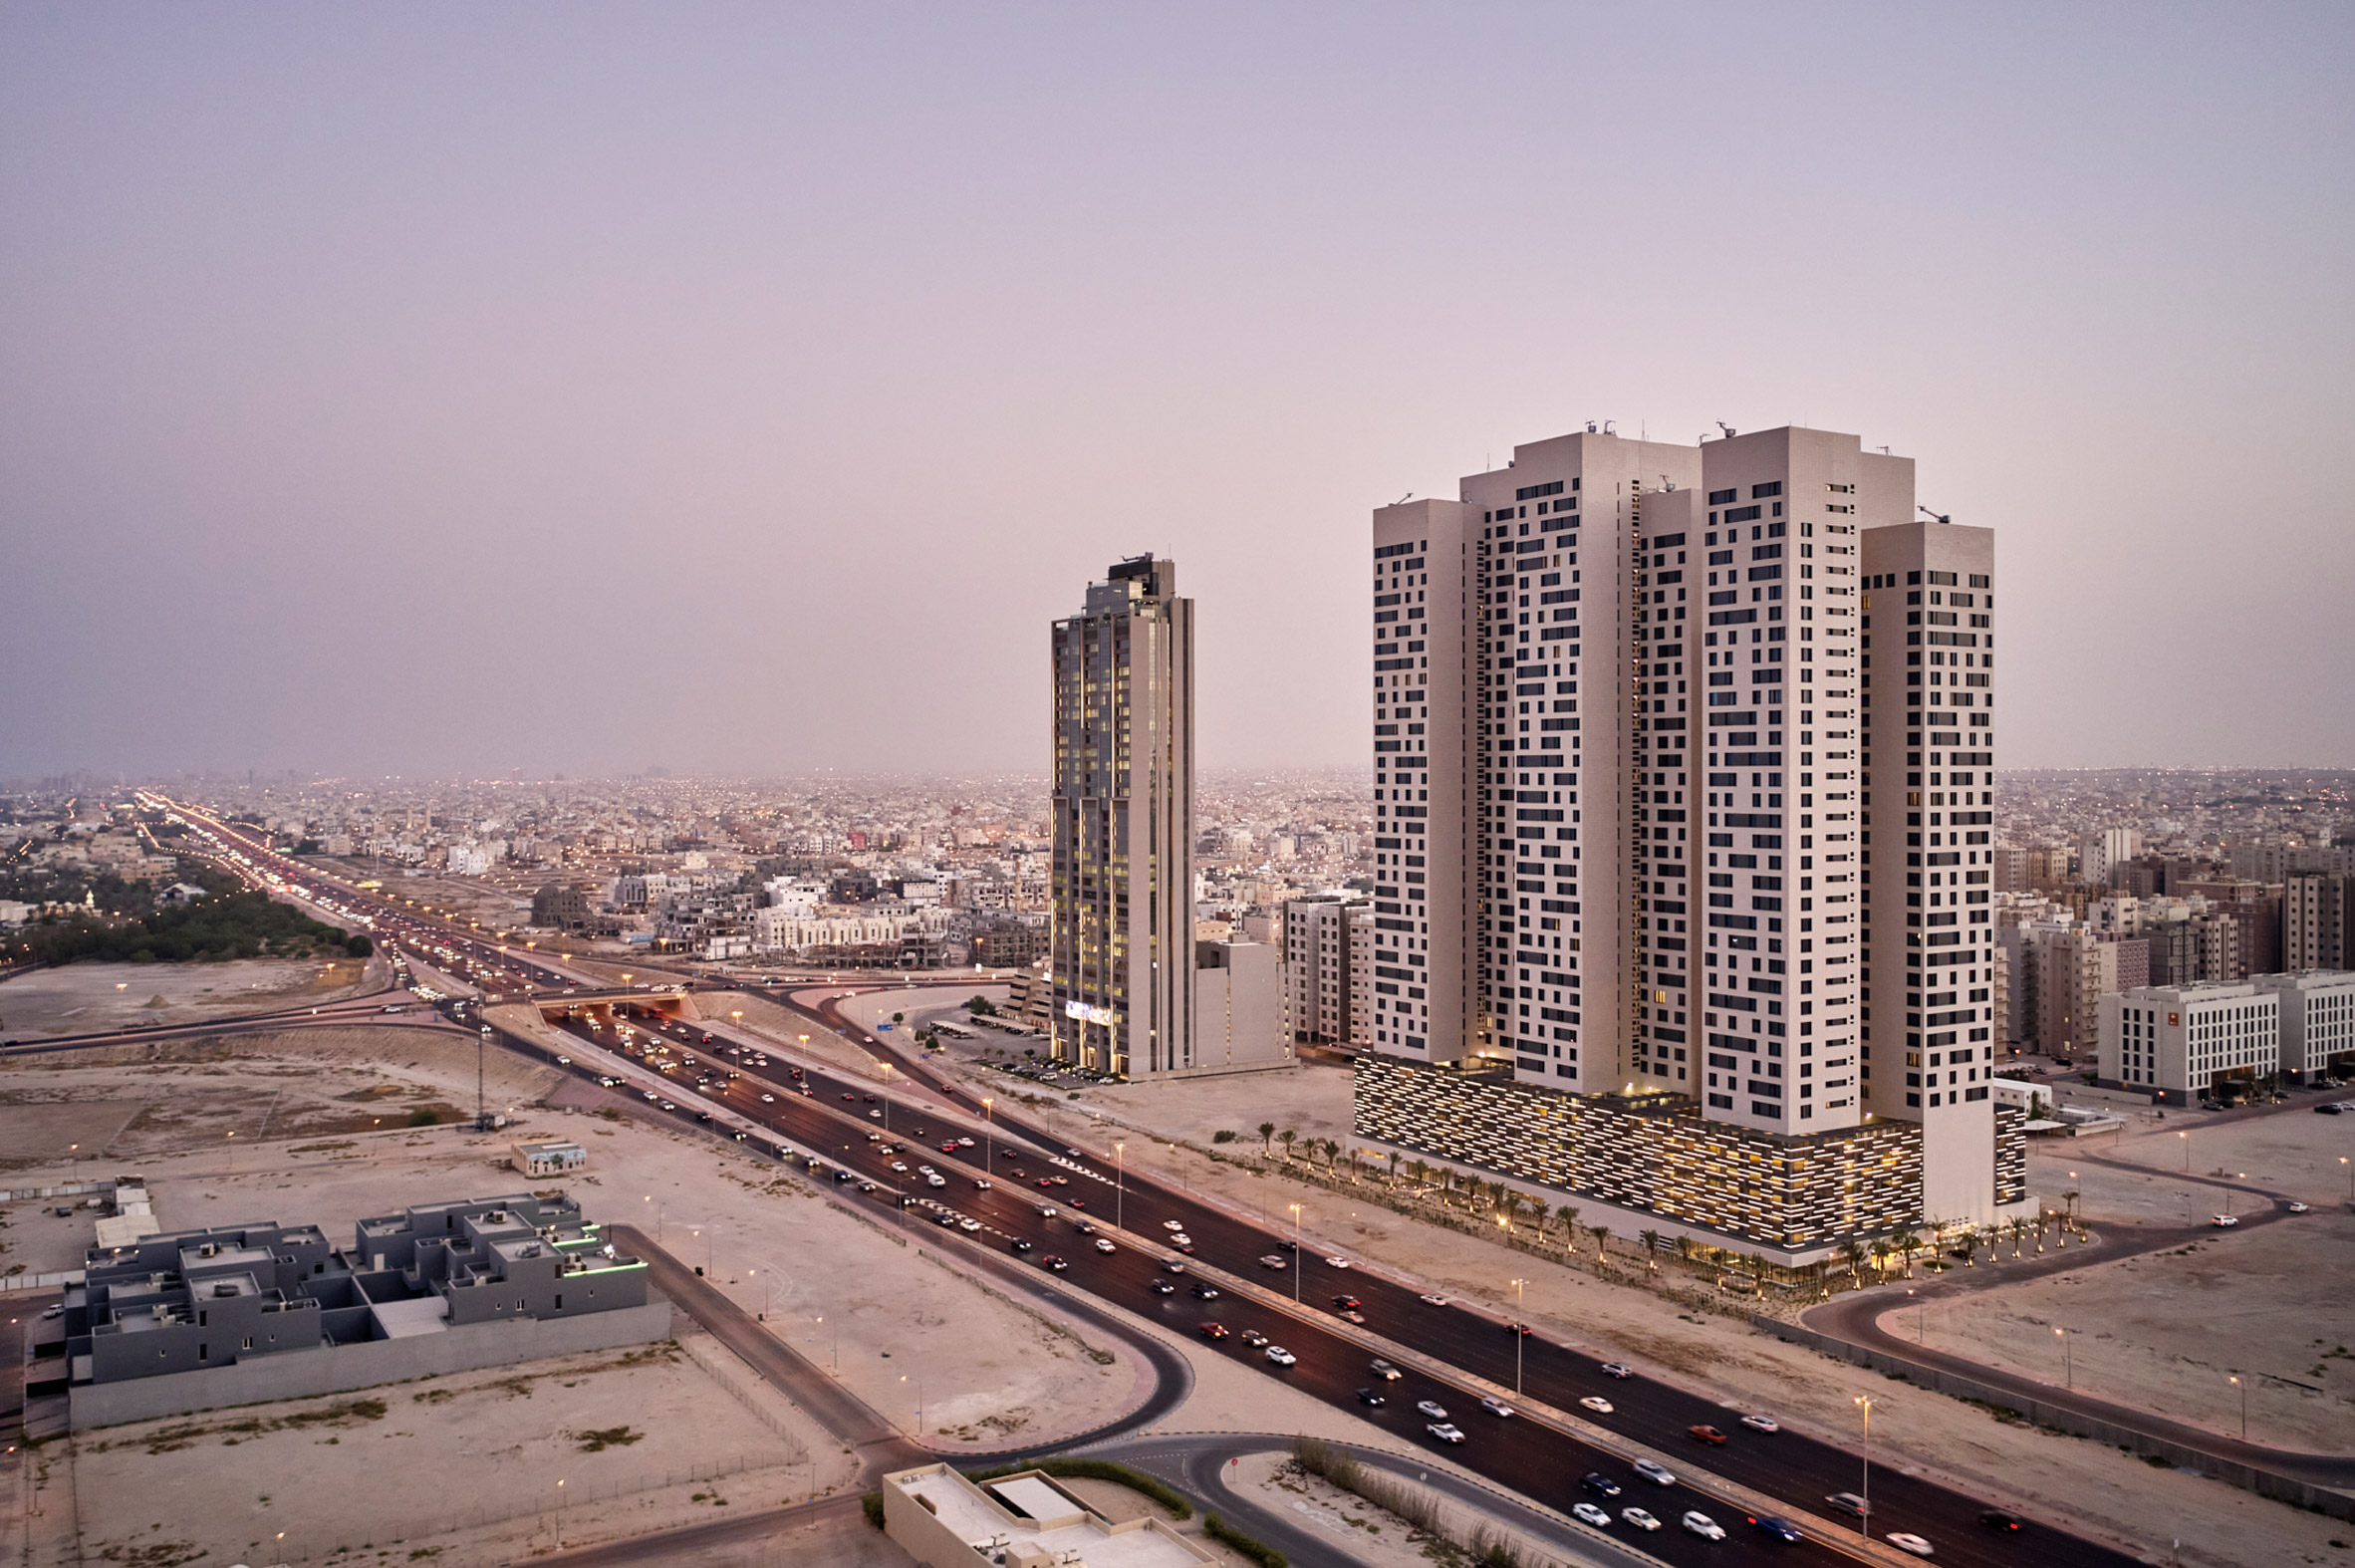 Image of Tamdeen Square towers along Kuwait City's skyline